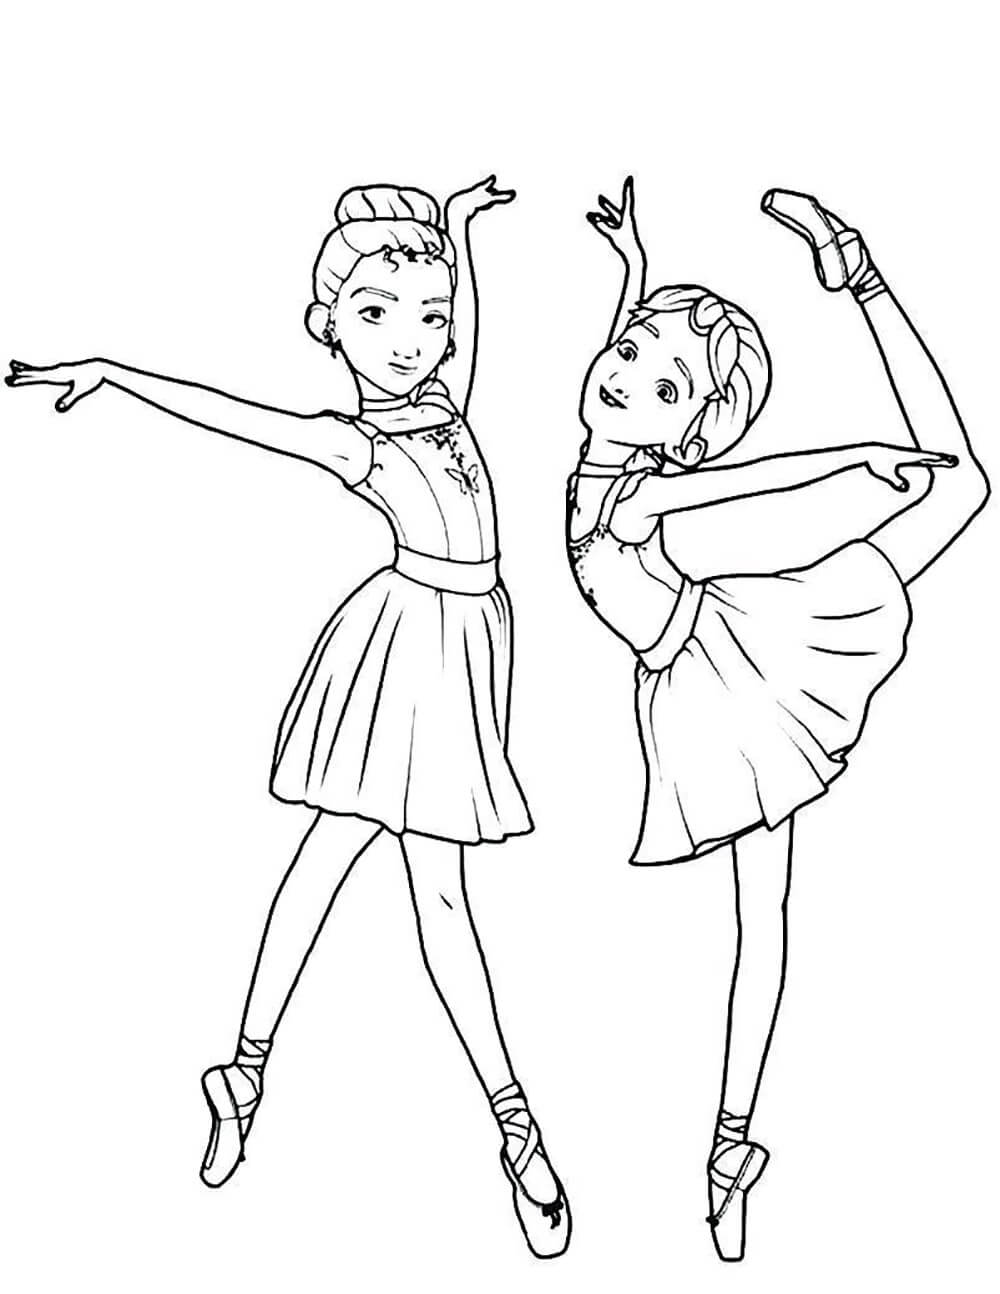 ballerina-dance-coloring-pages-mermaid-coloring-pages-ballerina